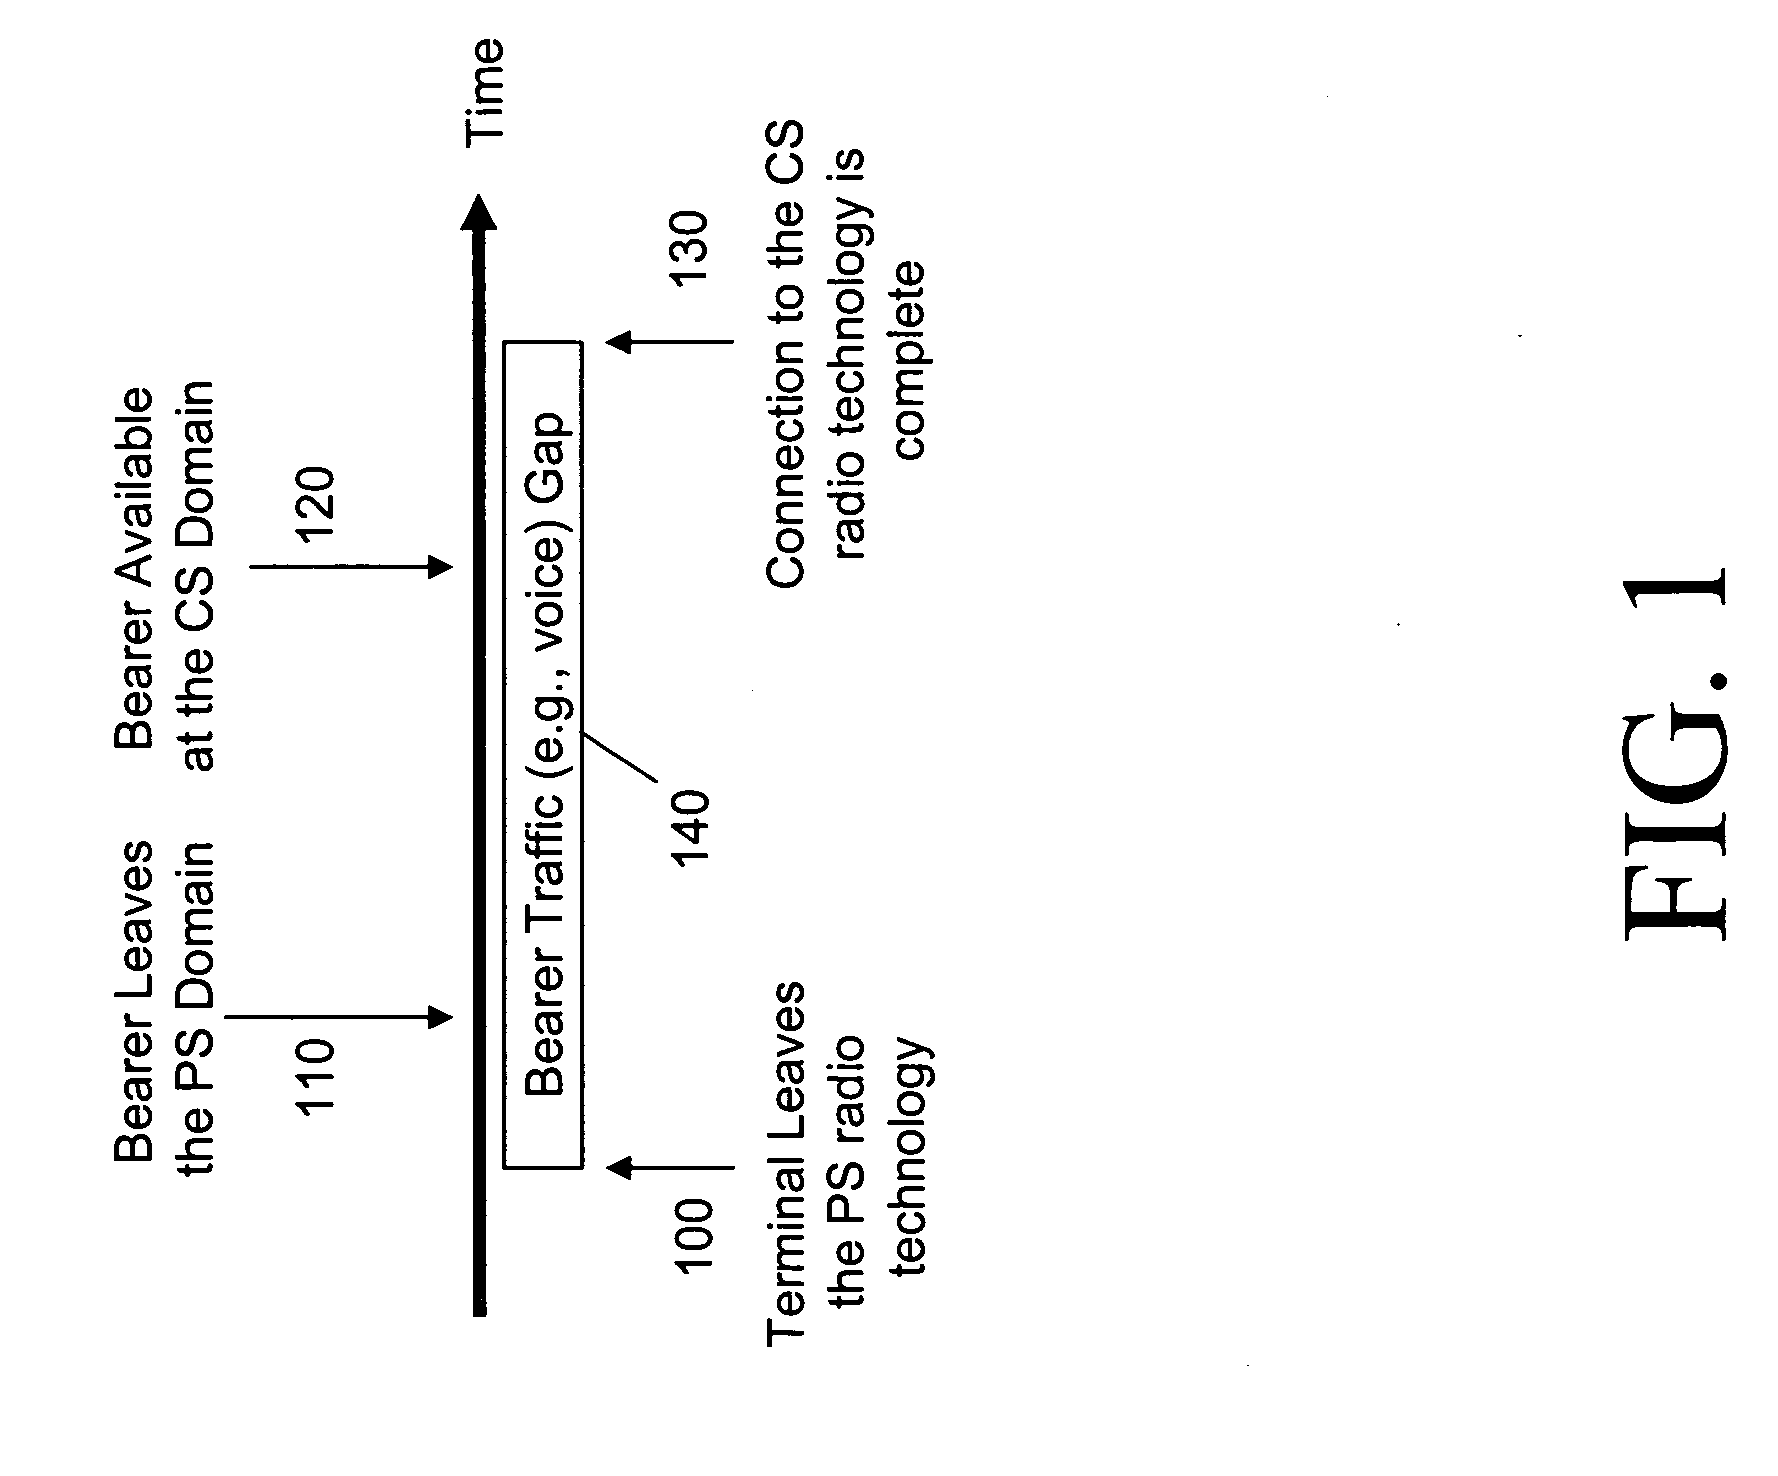 Method to improve the performance of handoffs between packet switched and circuit switched domains